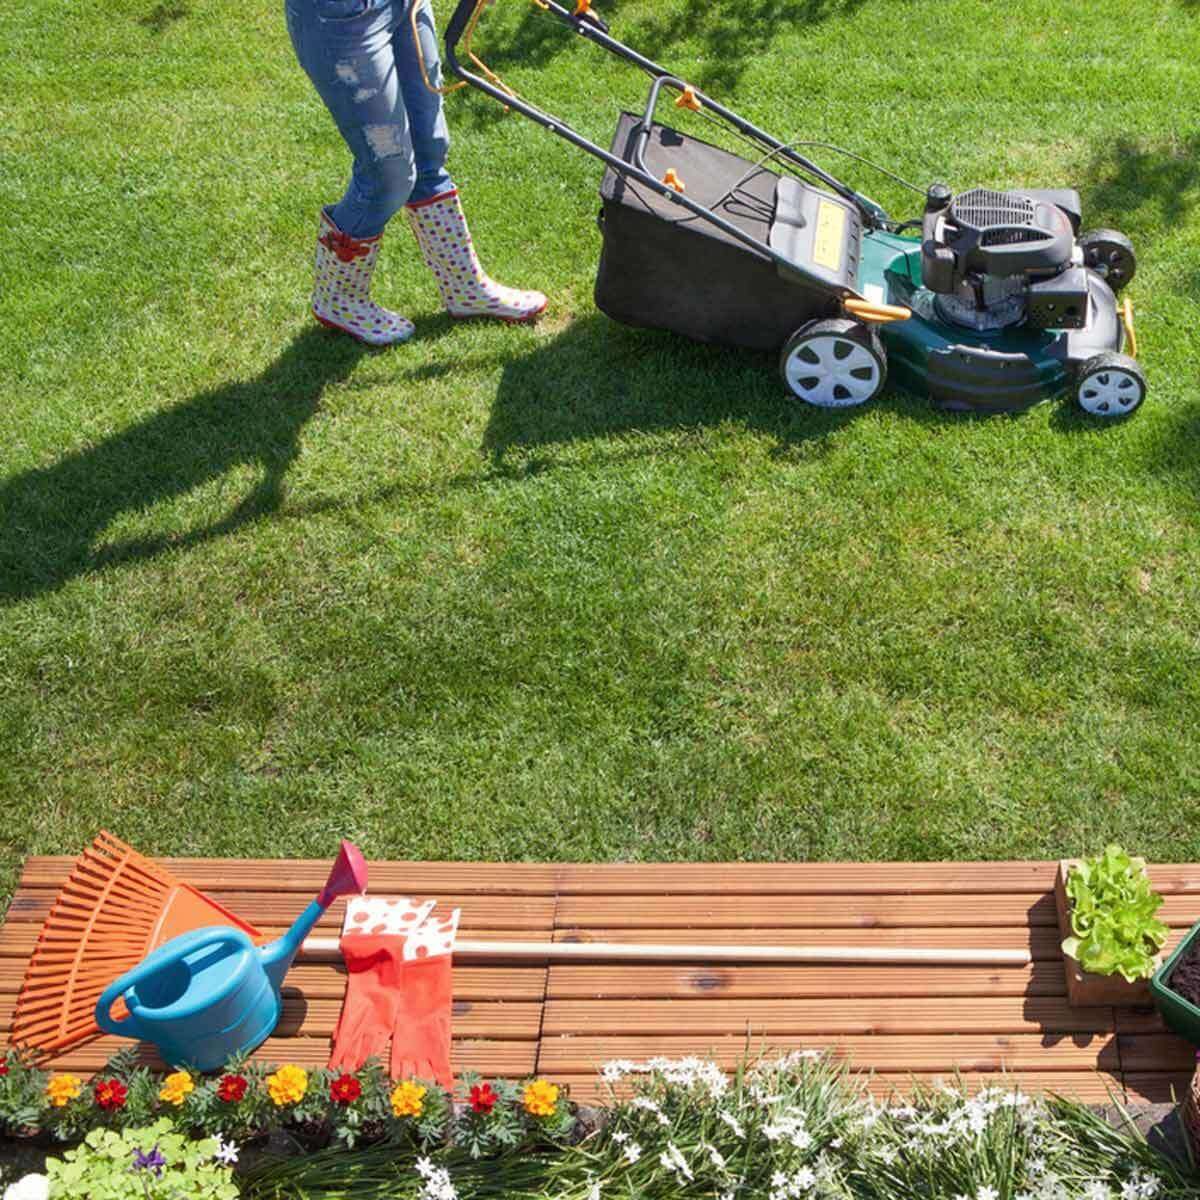 13 Best Lawn Care Products